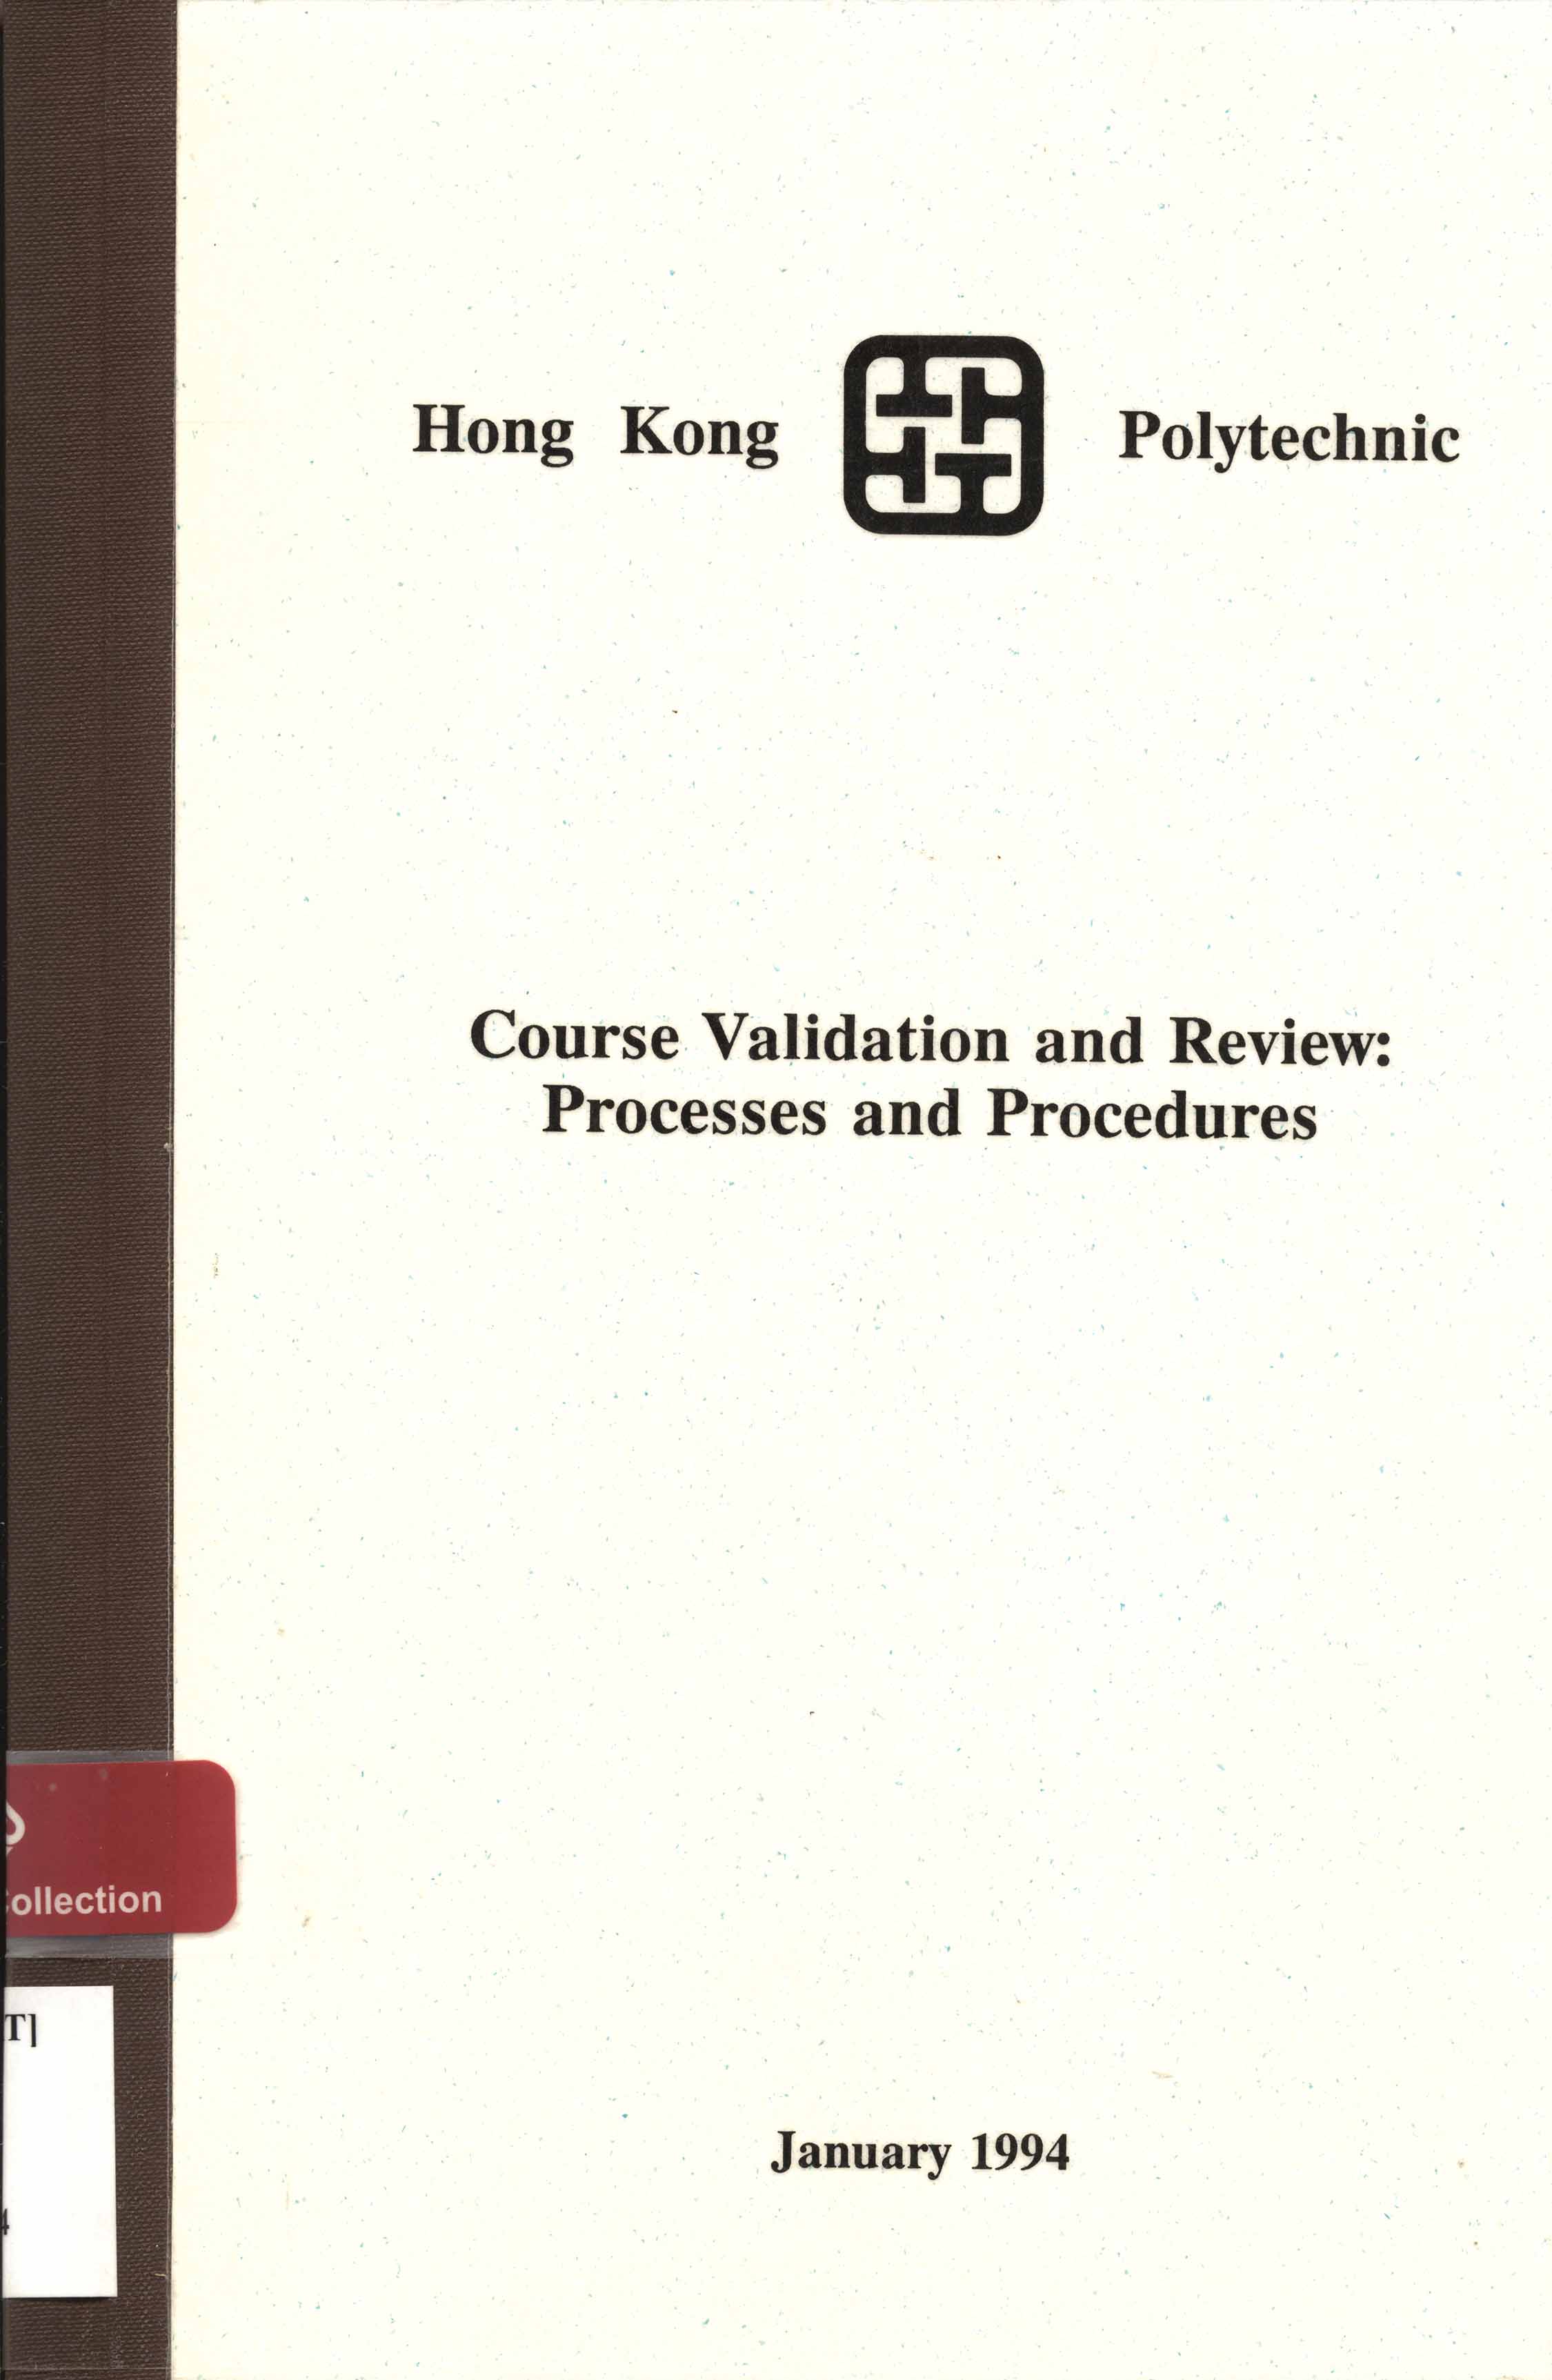 Course validation and review : processes and procedures 1994